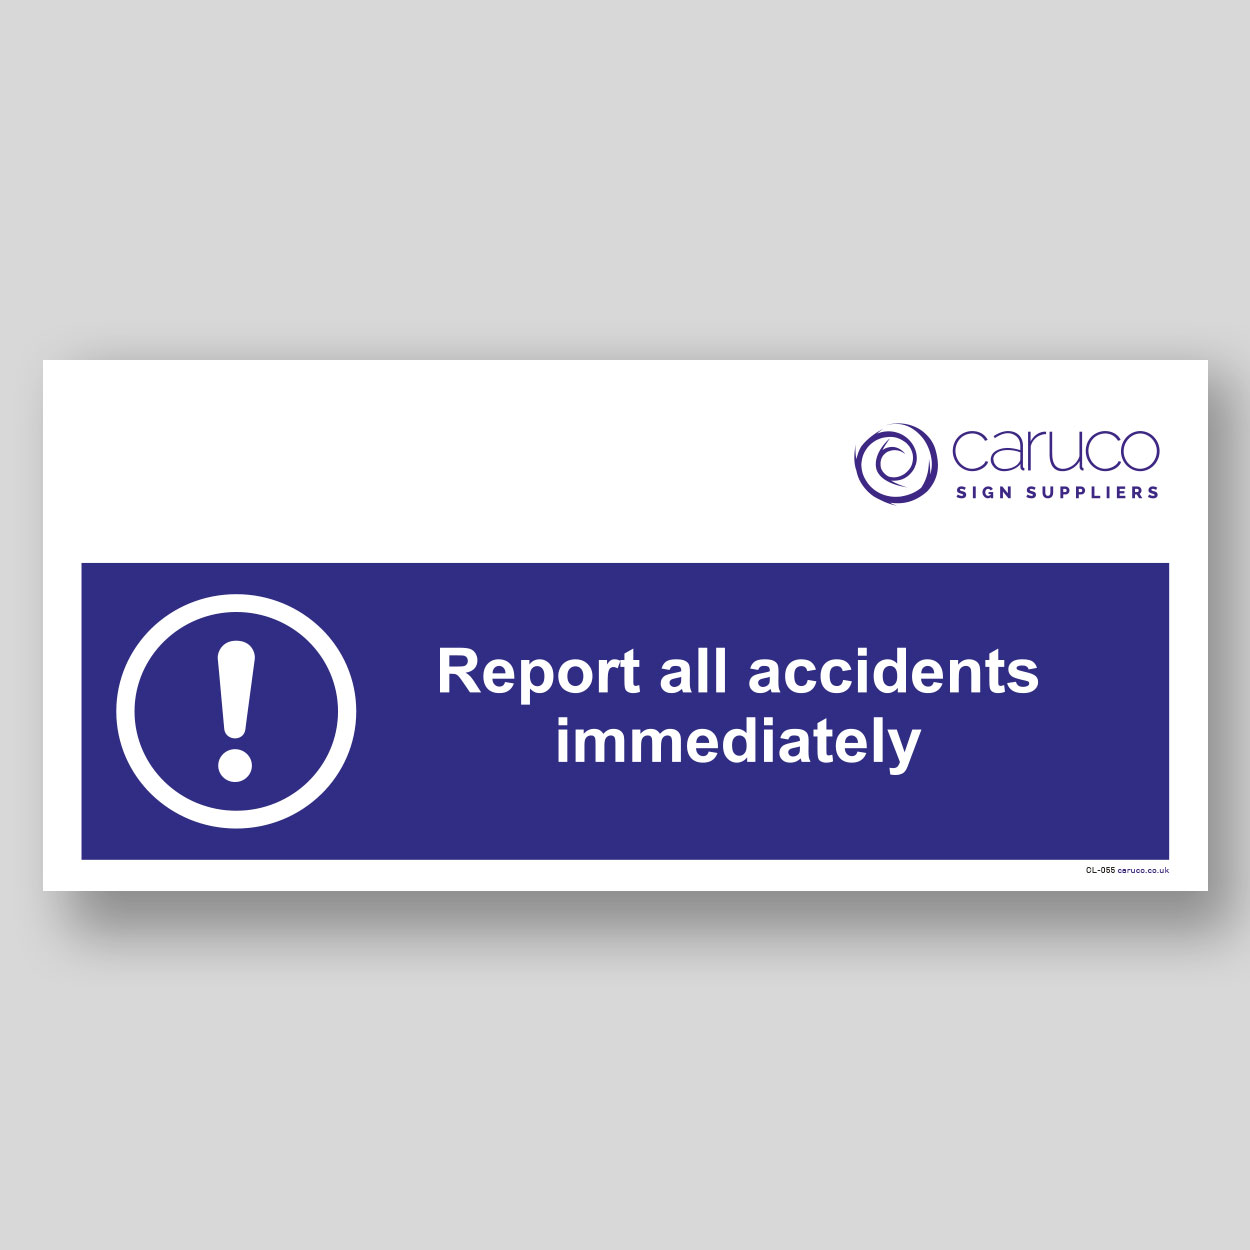 CL-055 Report all accidents